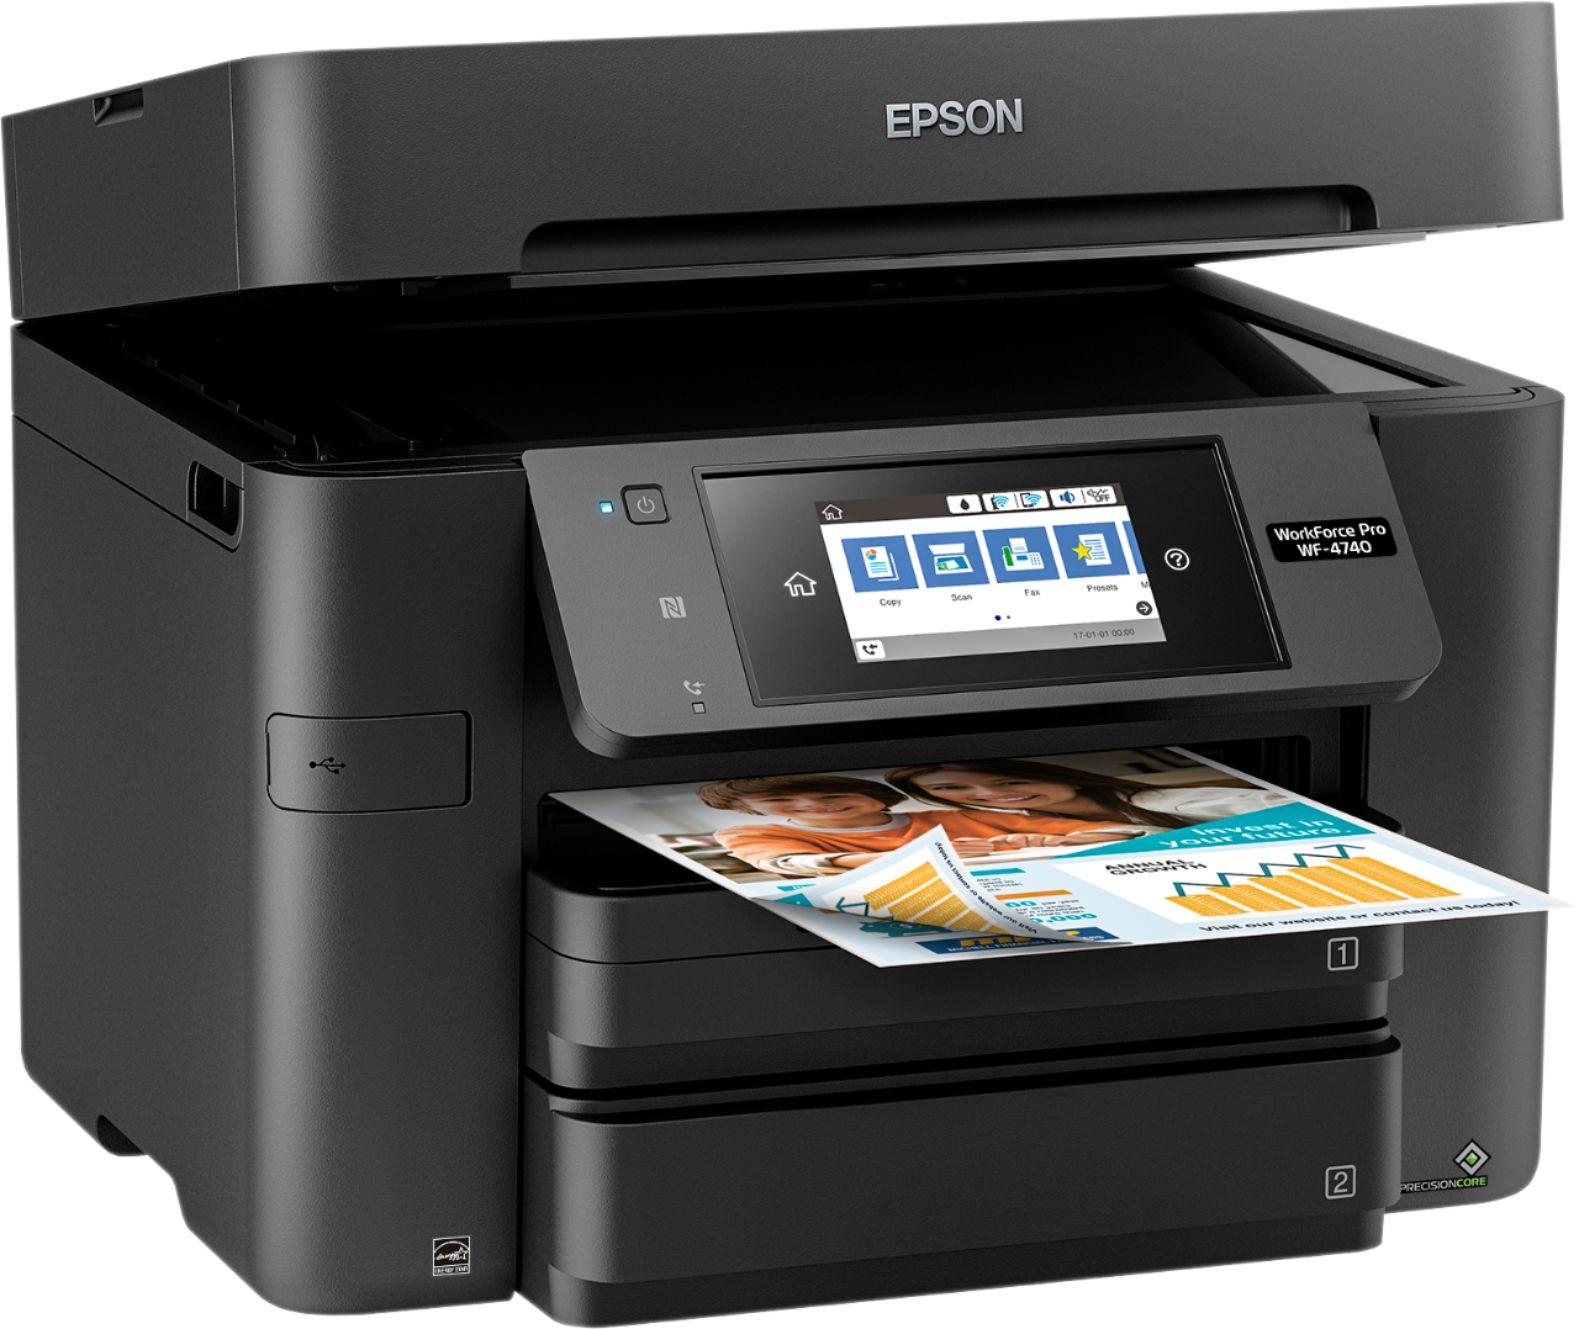 Angle View: Epson - WorkForce Pro WF-4740 Wireless All-In-One Inkjet Printer - Black